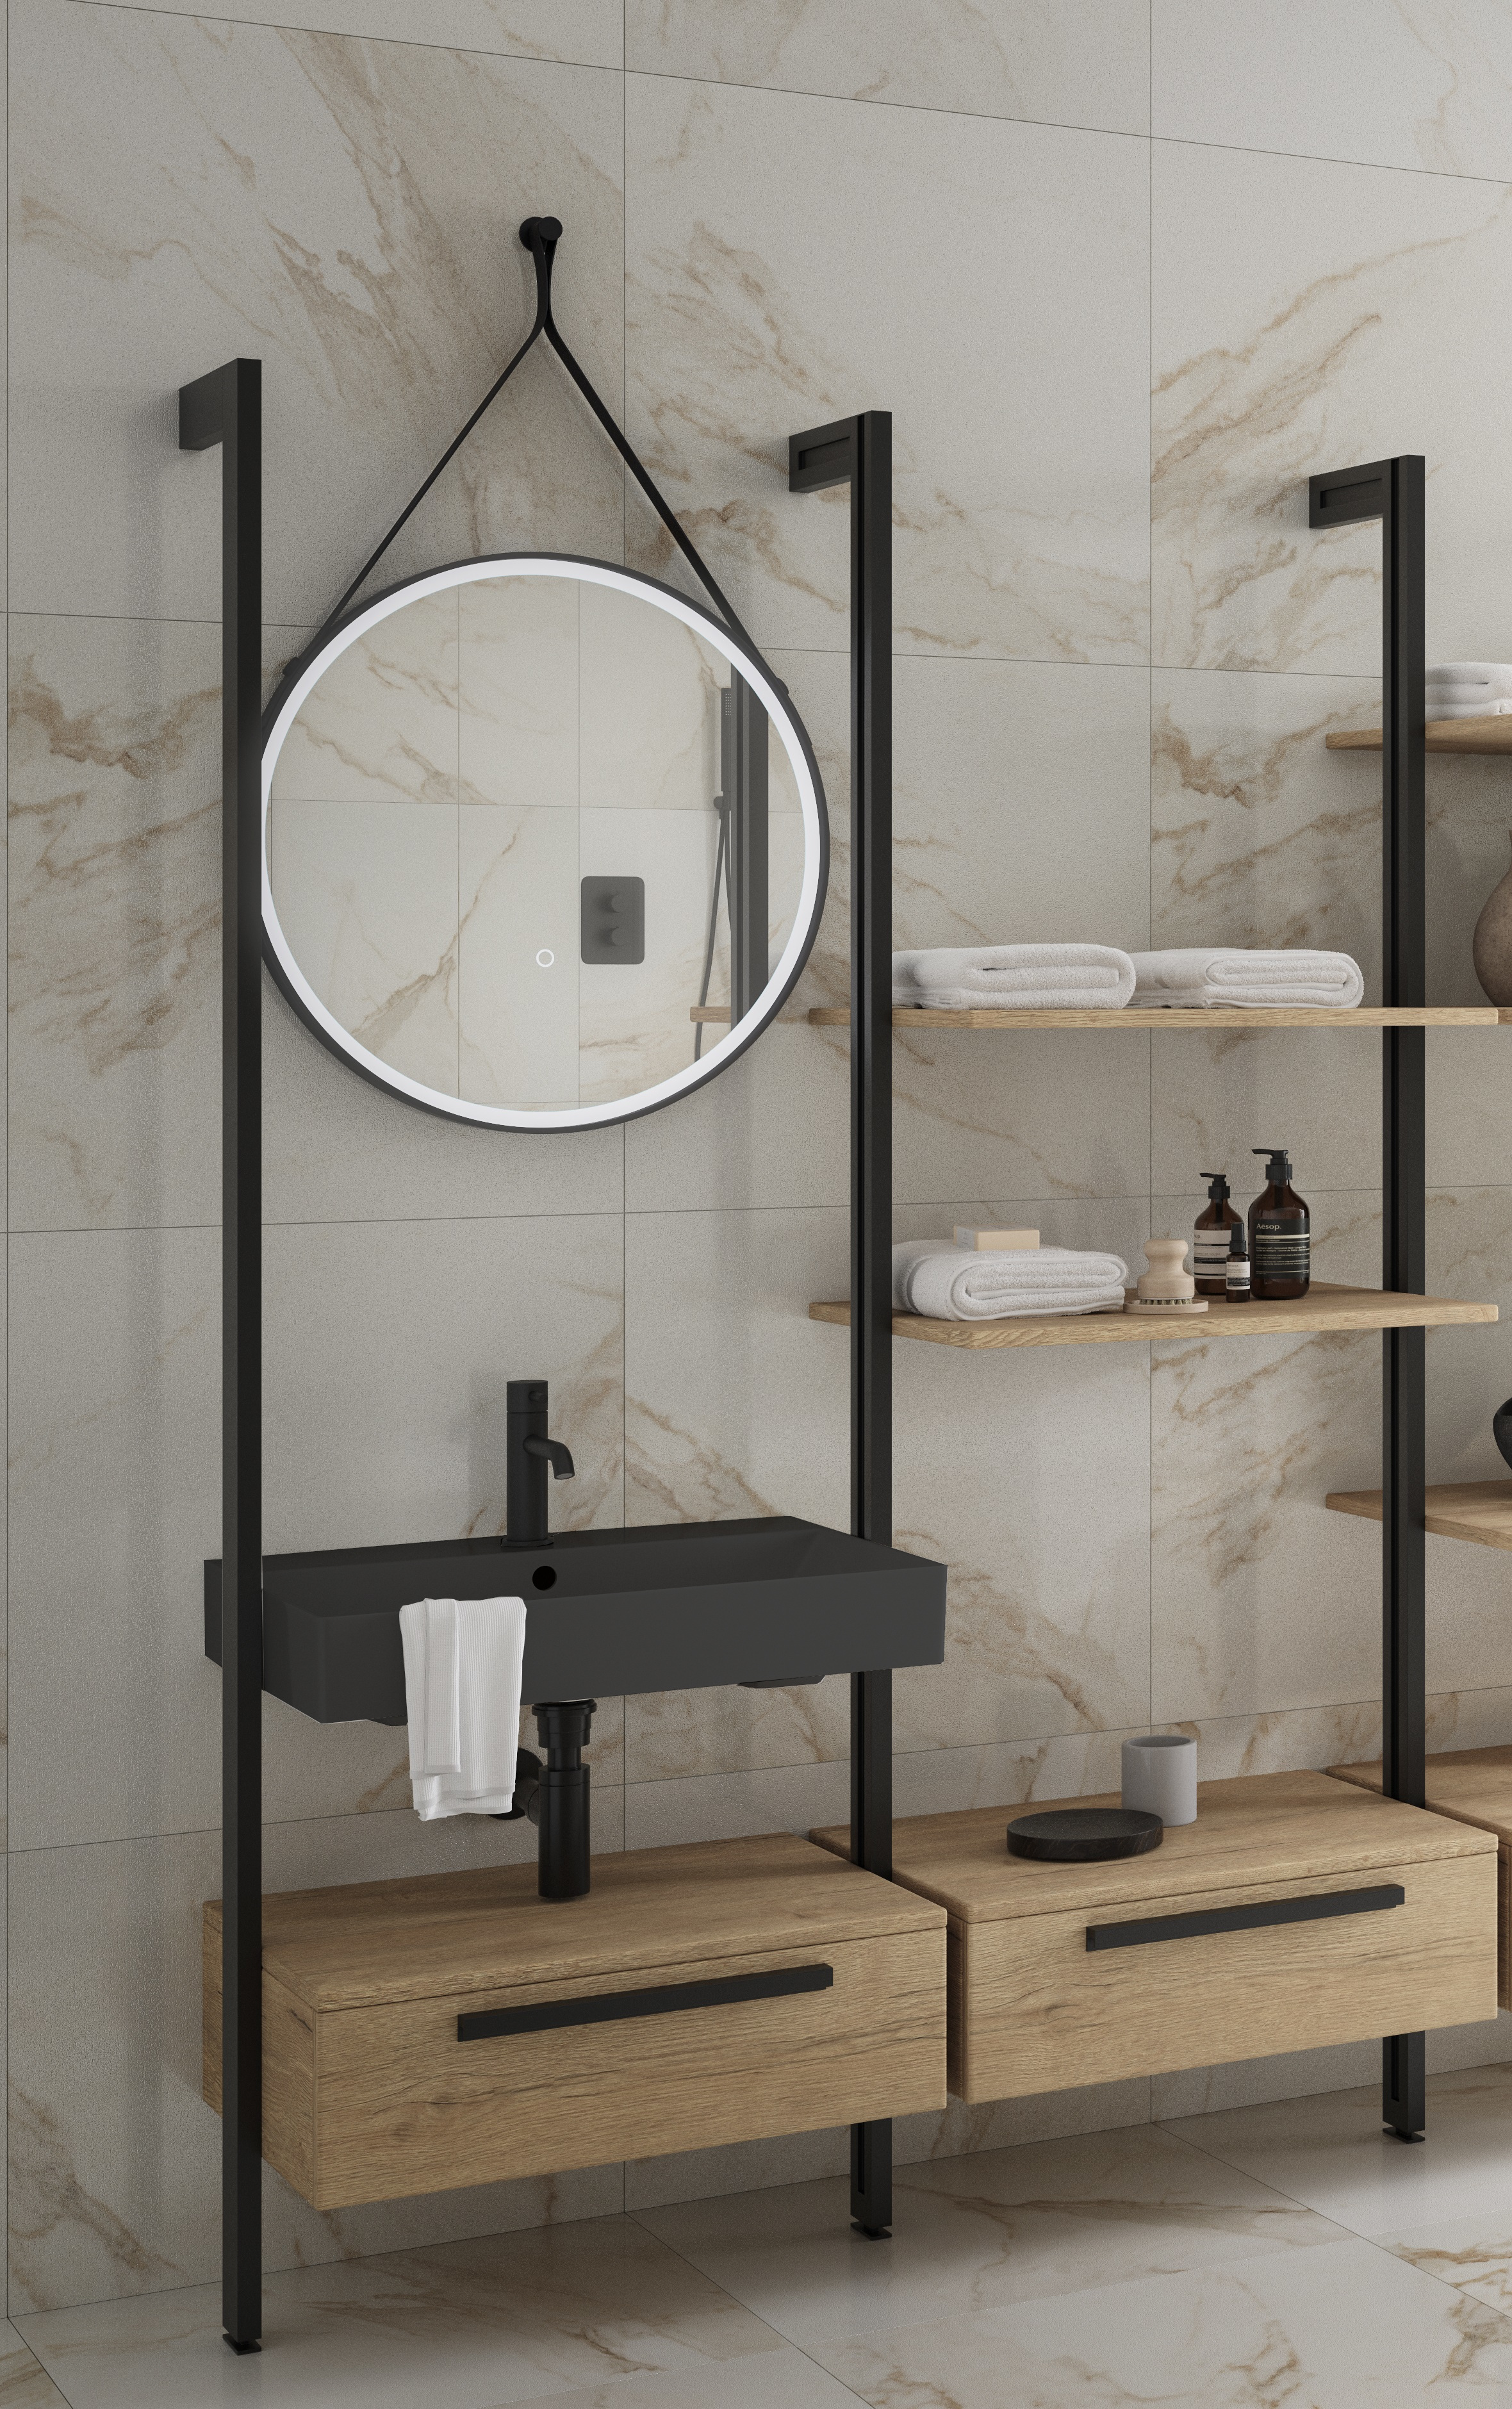 Wickes Rimini Wall System Vanity Unit Only with Shelves & Black Basin - 1200mm